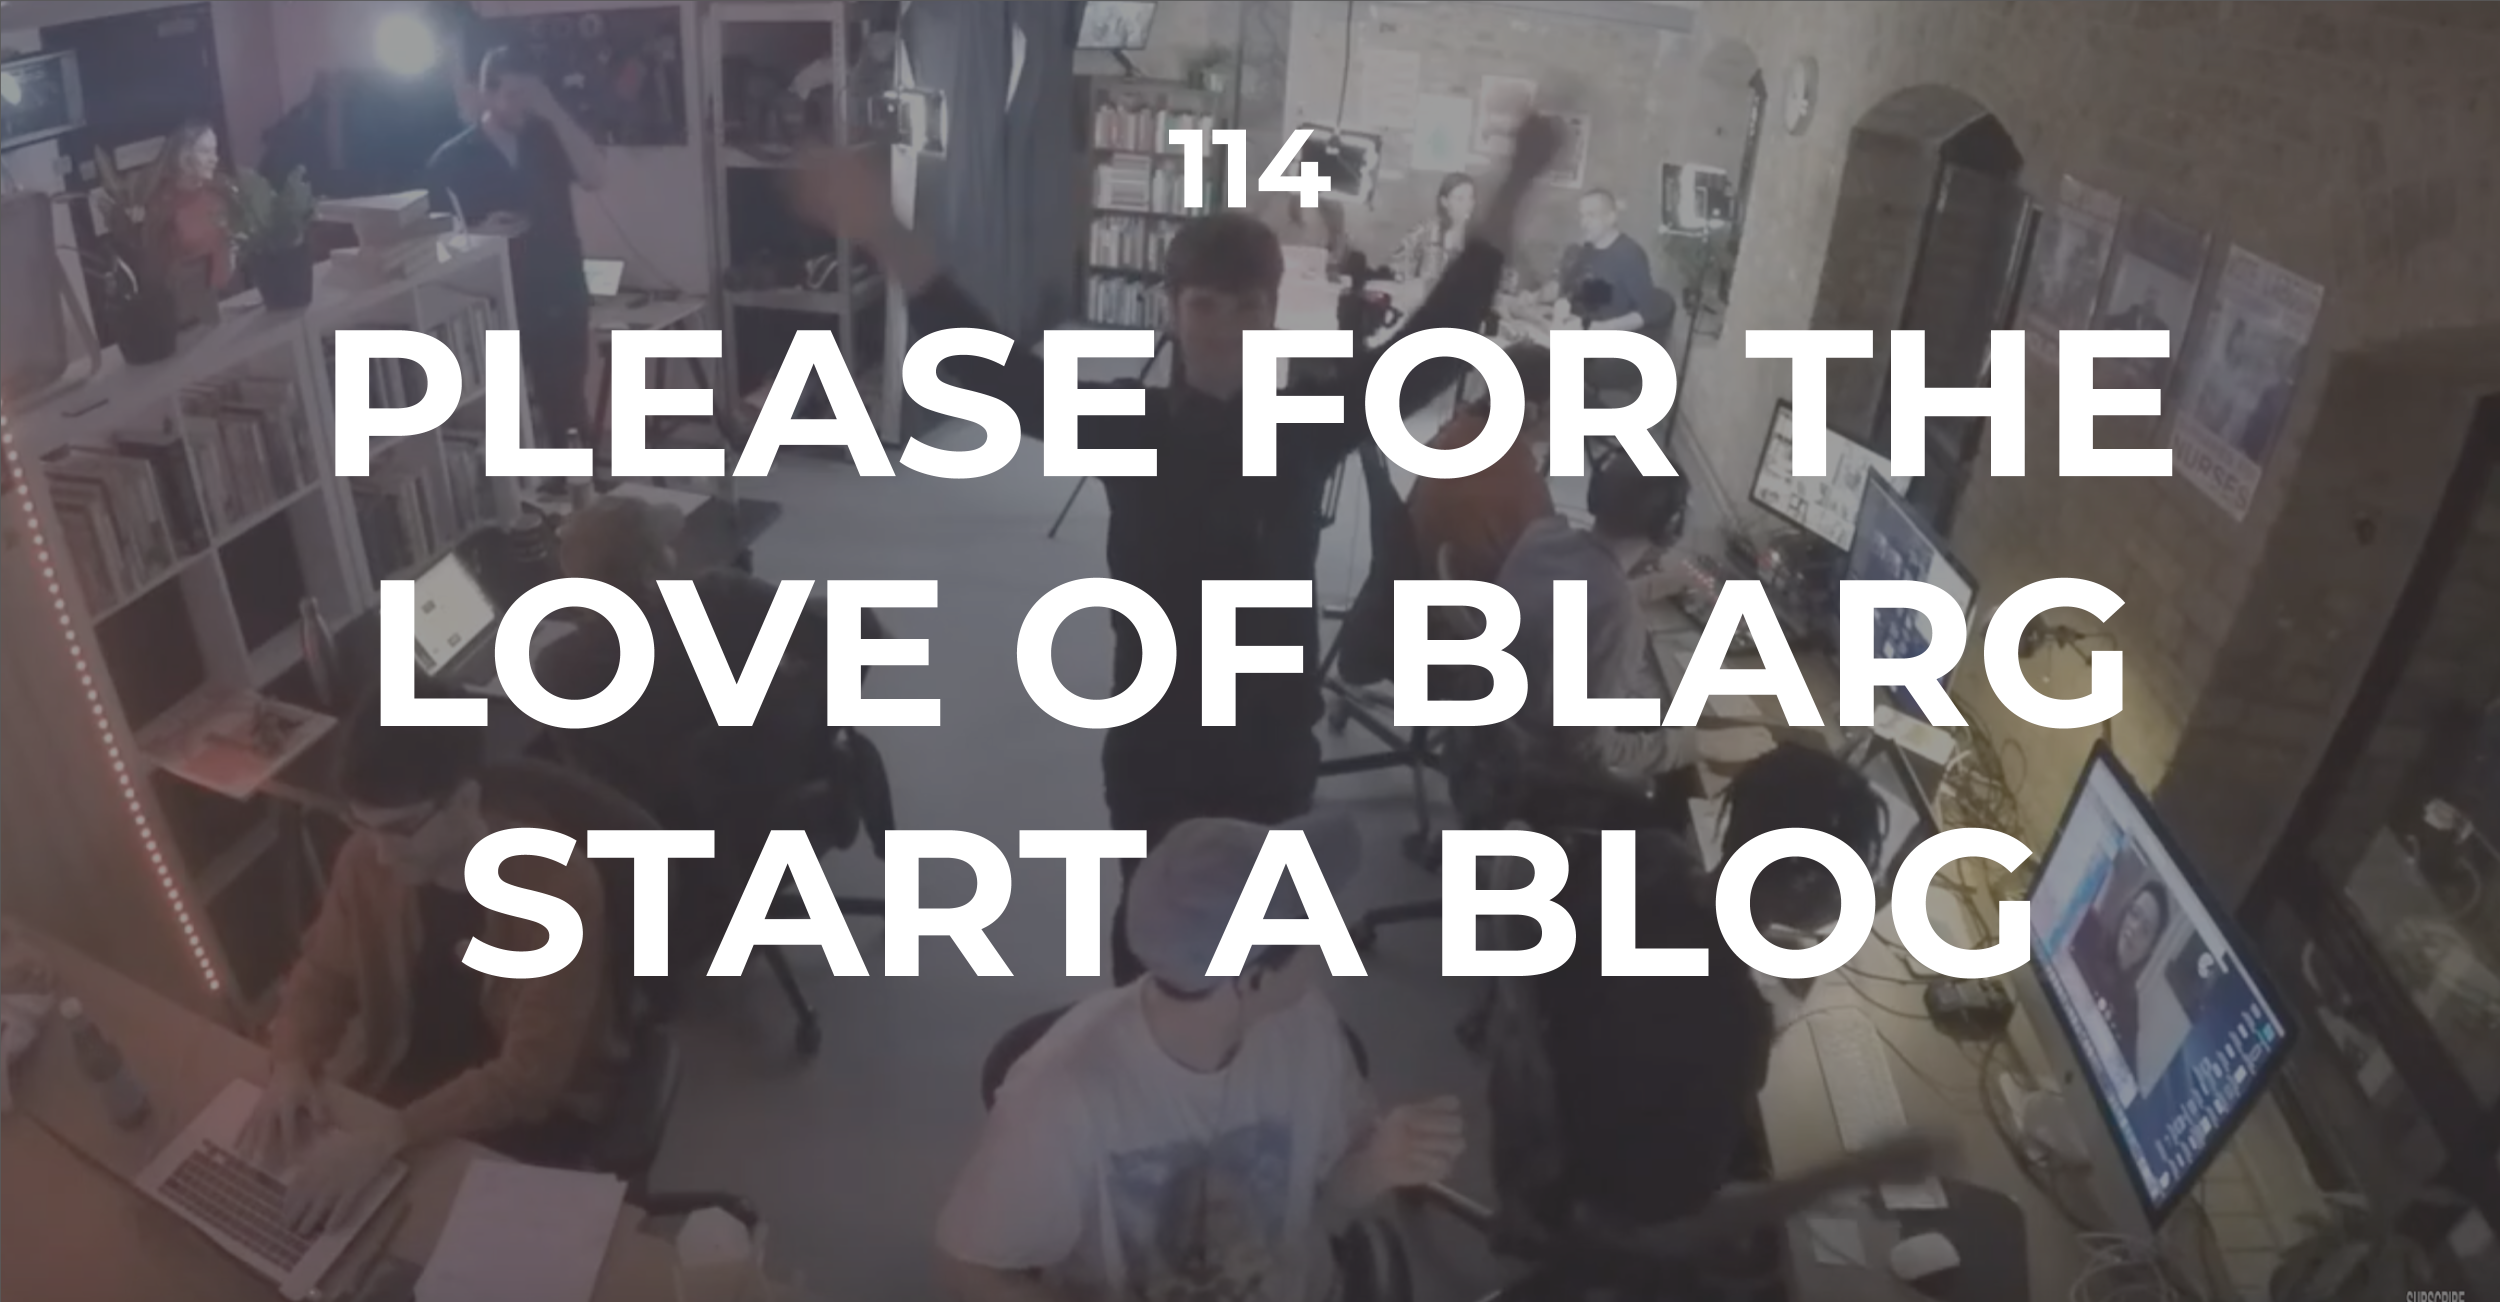 Please for the love of Blarg, Start a Blog